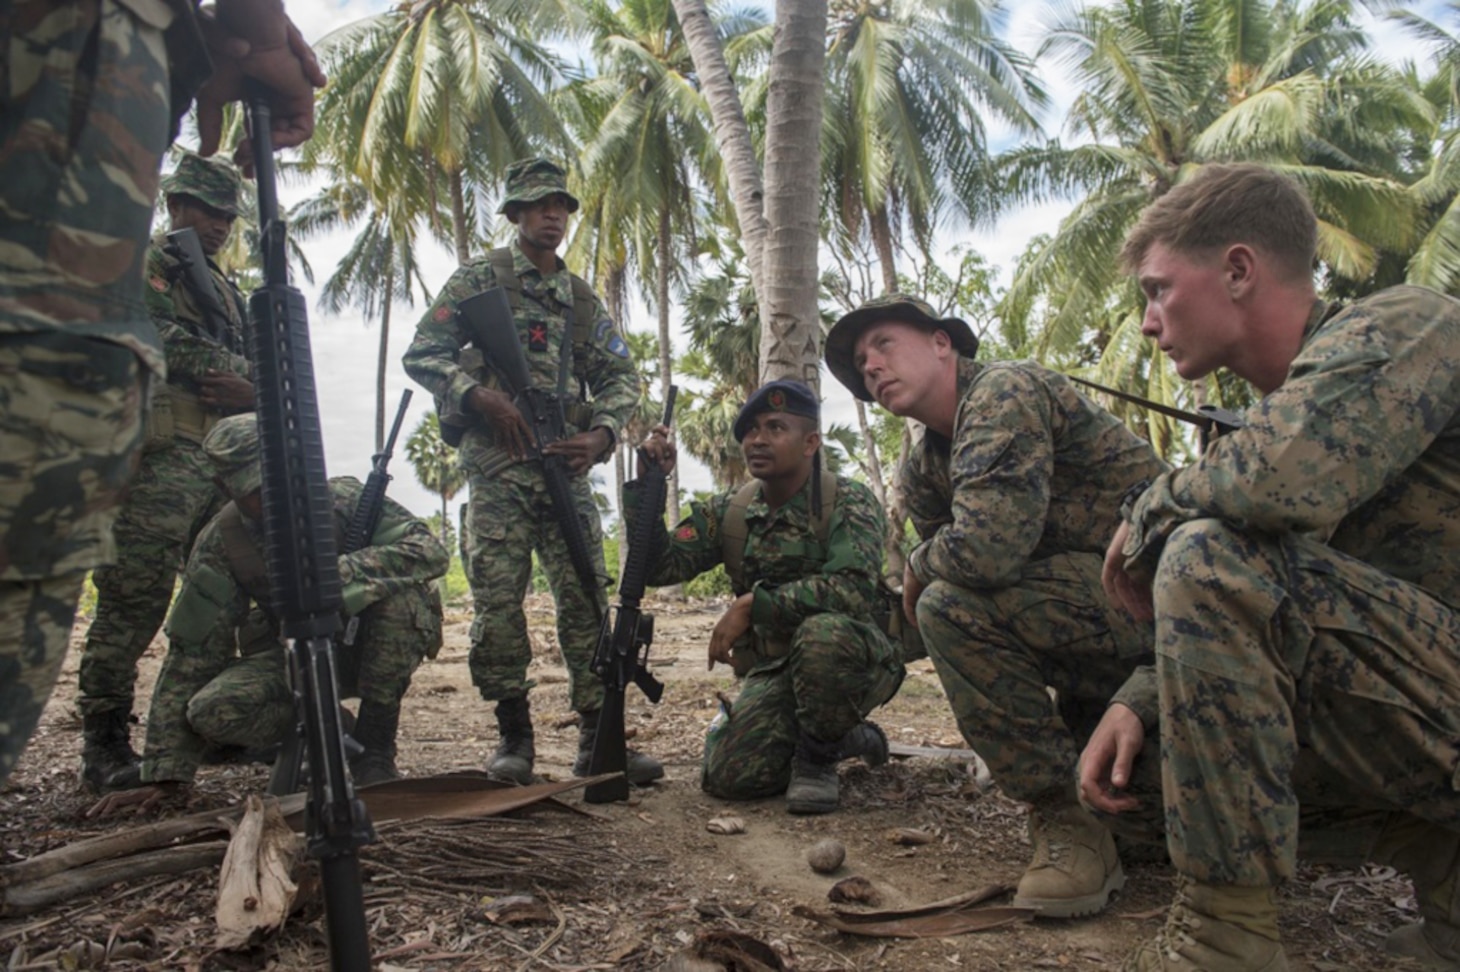 U.S. Marine Sgt. Christopher Krieg, assigned to Fleet Anti-terrorism Security Team Pacific, listens to a question from a Forsa Defesa Timor-Leste (F-FDTL) service member while discussing convoy ambushes during Cooperation Afloat Readiness and Training (CARAT) Timor-Leste 2016. The focus of CARAT is developing maritime security capabilities and increasing interoperability among participants. Skill areas exercised during CARAT include Maritime Interdiction Operations; riverine, amphibious and undersea warfare operations; diving and salvage operations; naval gunnery and maneuvering events, along with disaster response exercises.